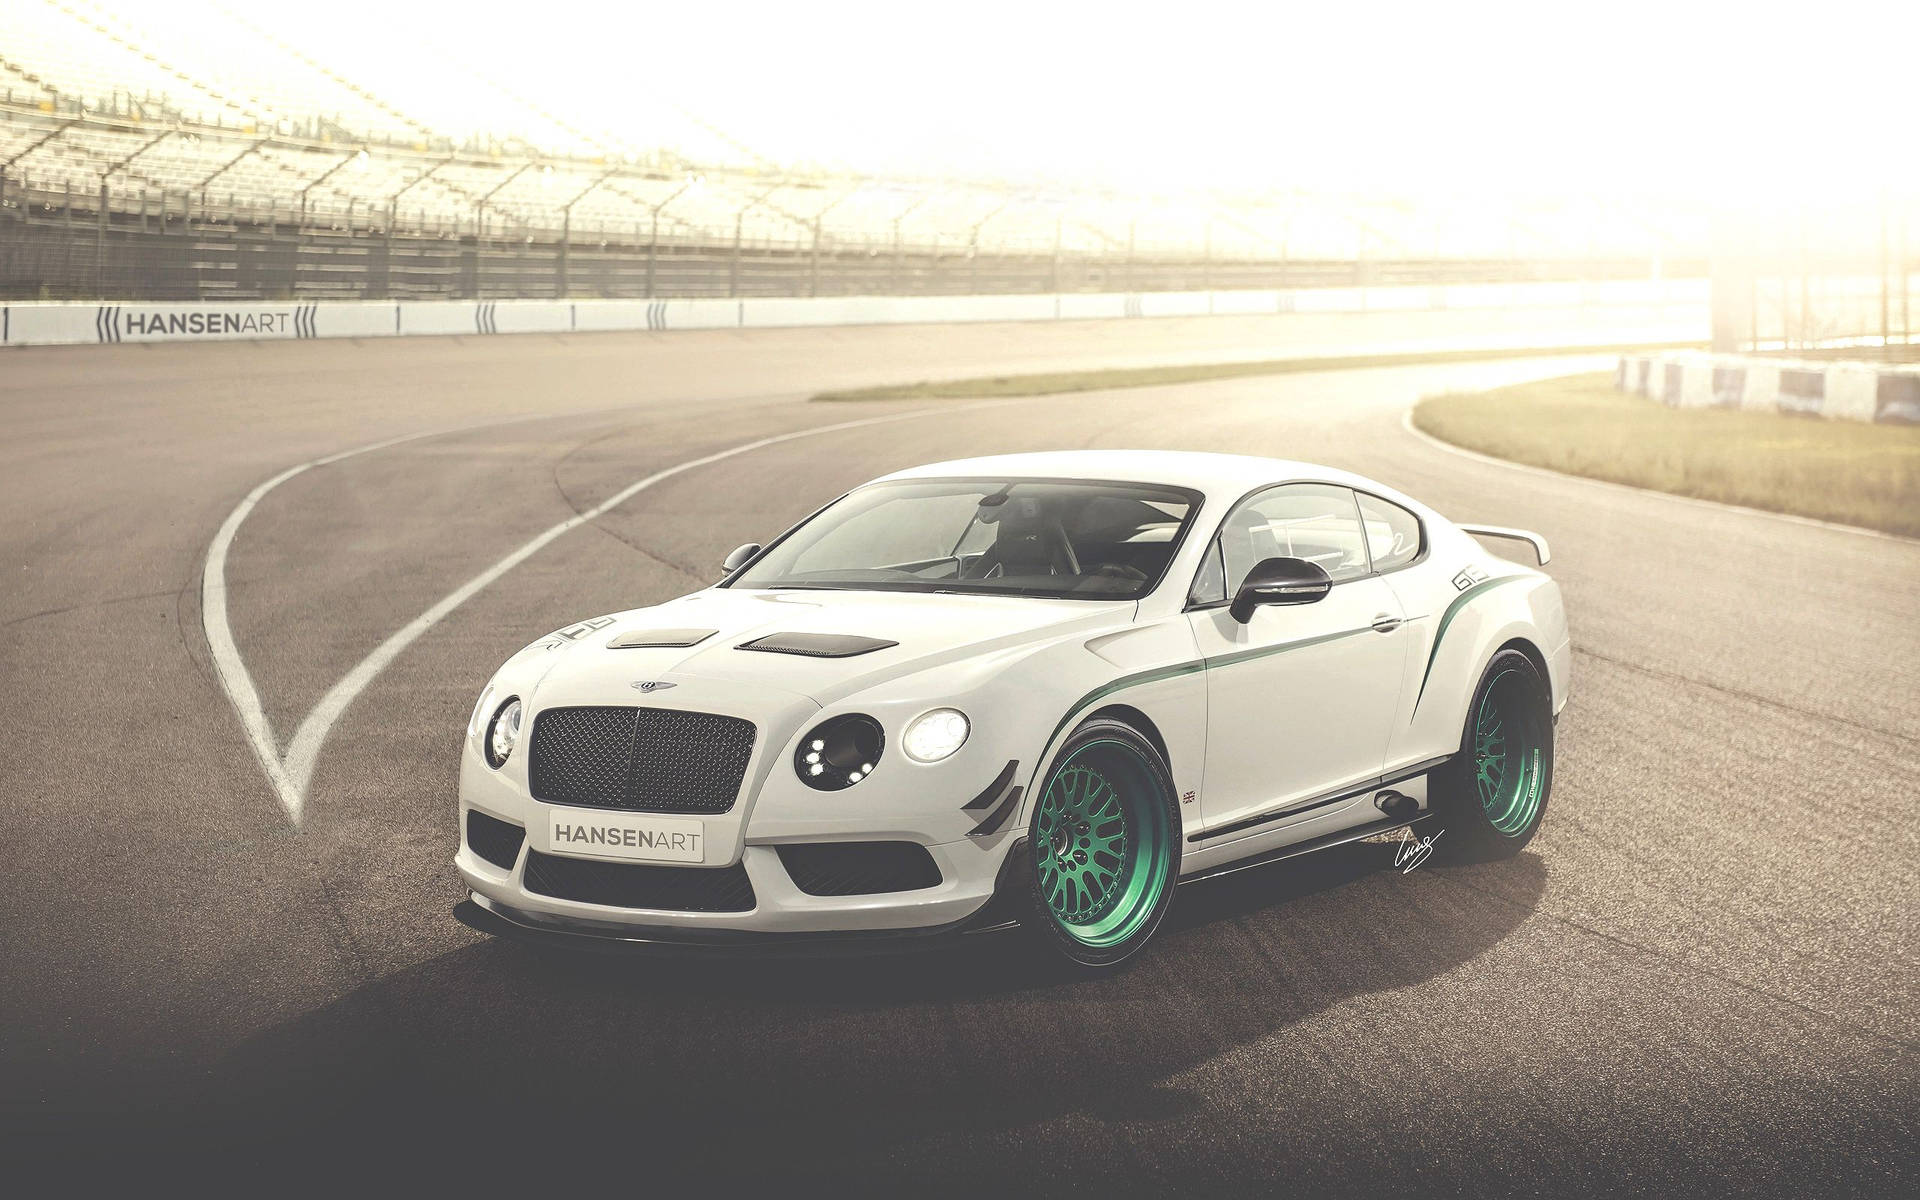 Astonish in Stunning Style with the Bentley Continental GT3-R Wallpaper